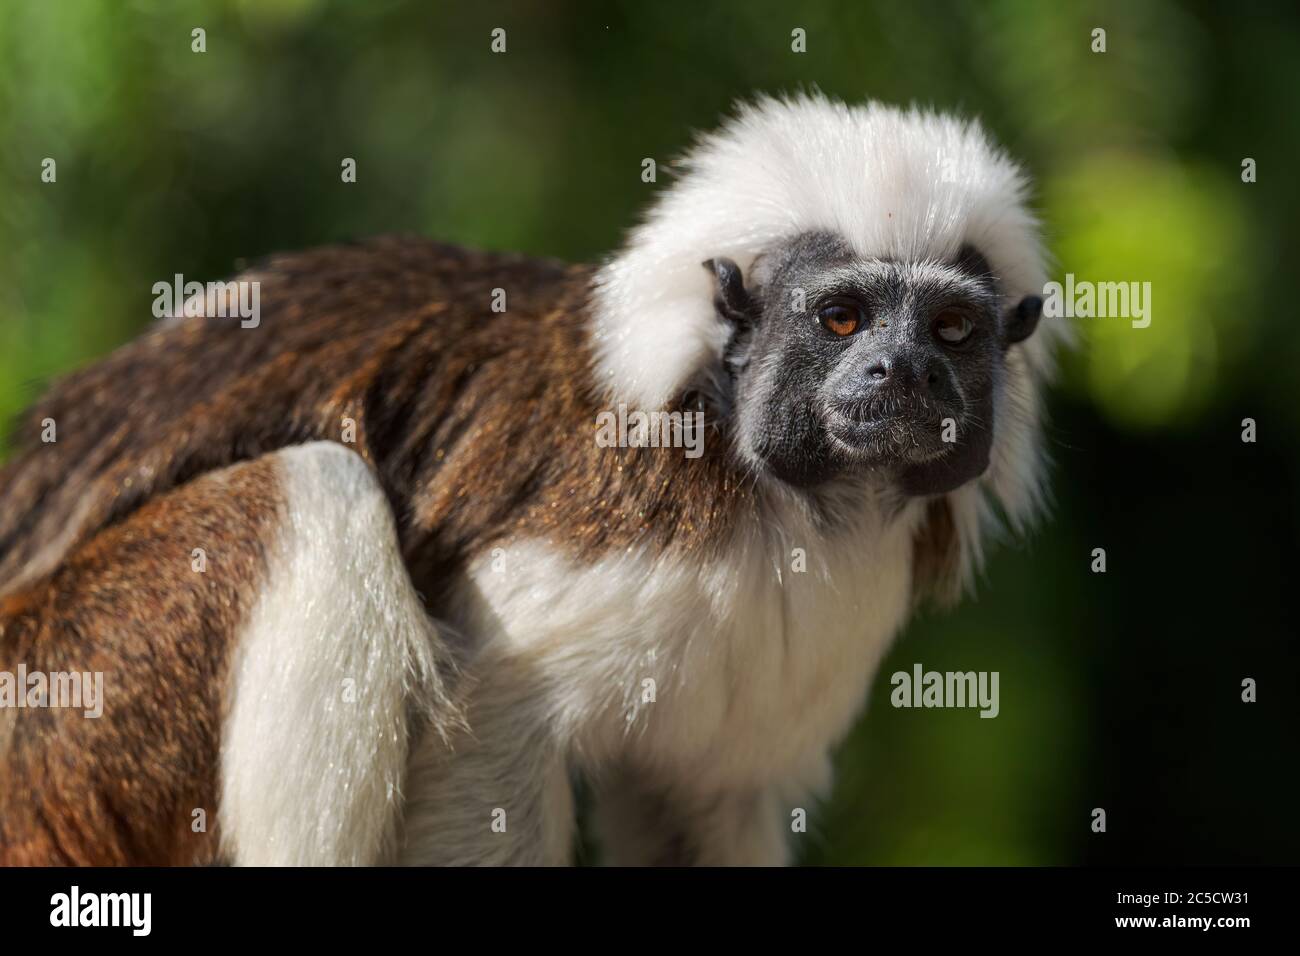 Cotton-top Tamarin - Saguinus oedipus, beautiful small primate from South American tropical forests, Colombia. Stock Photo